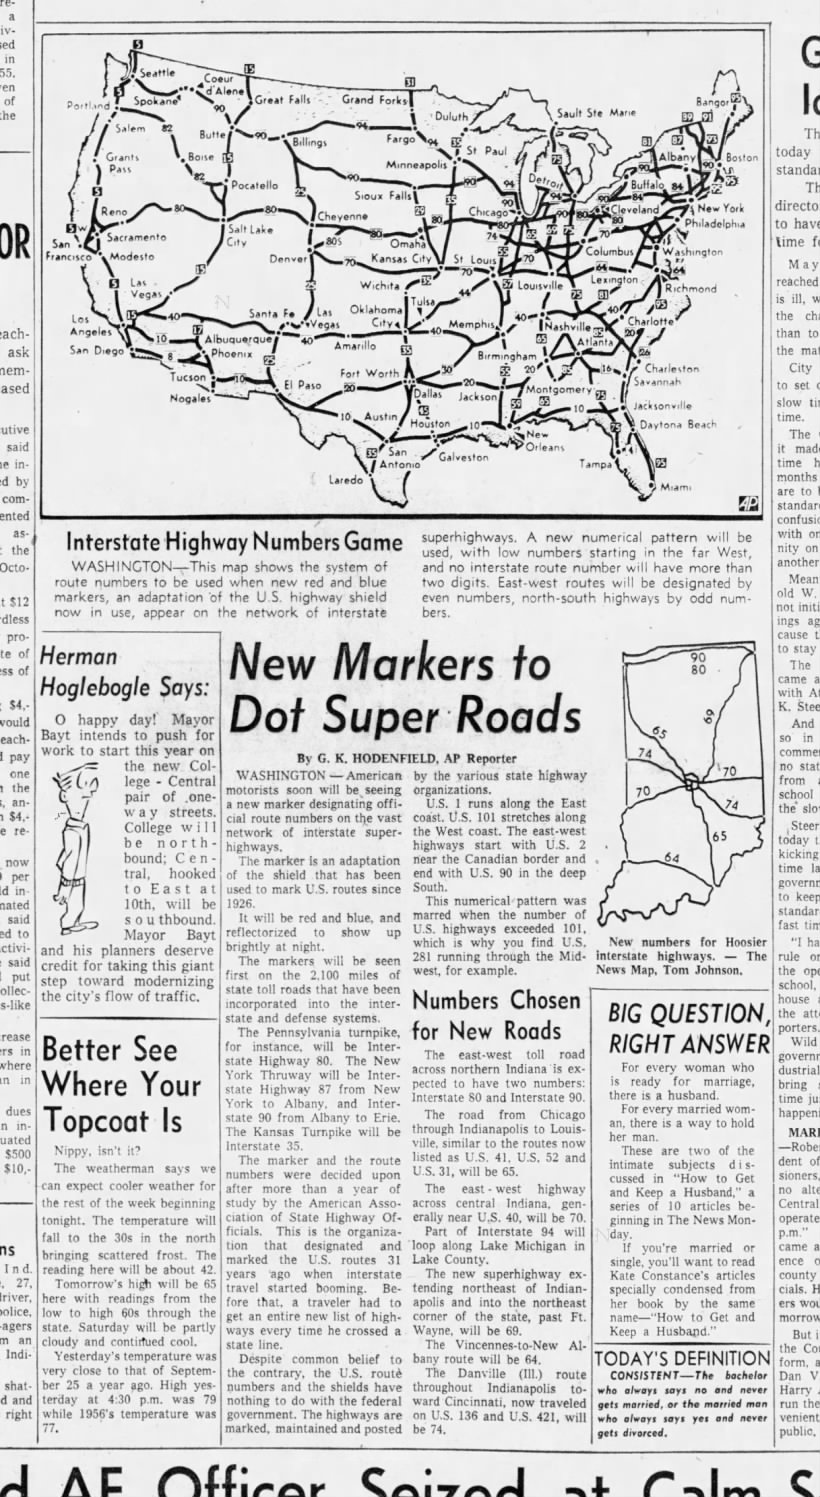 New Markers to Dot Super Roads